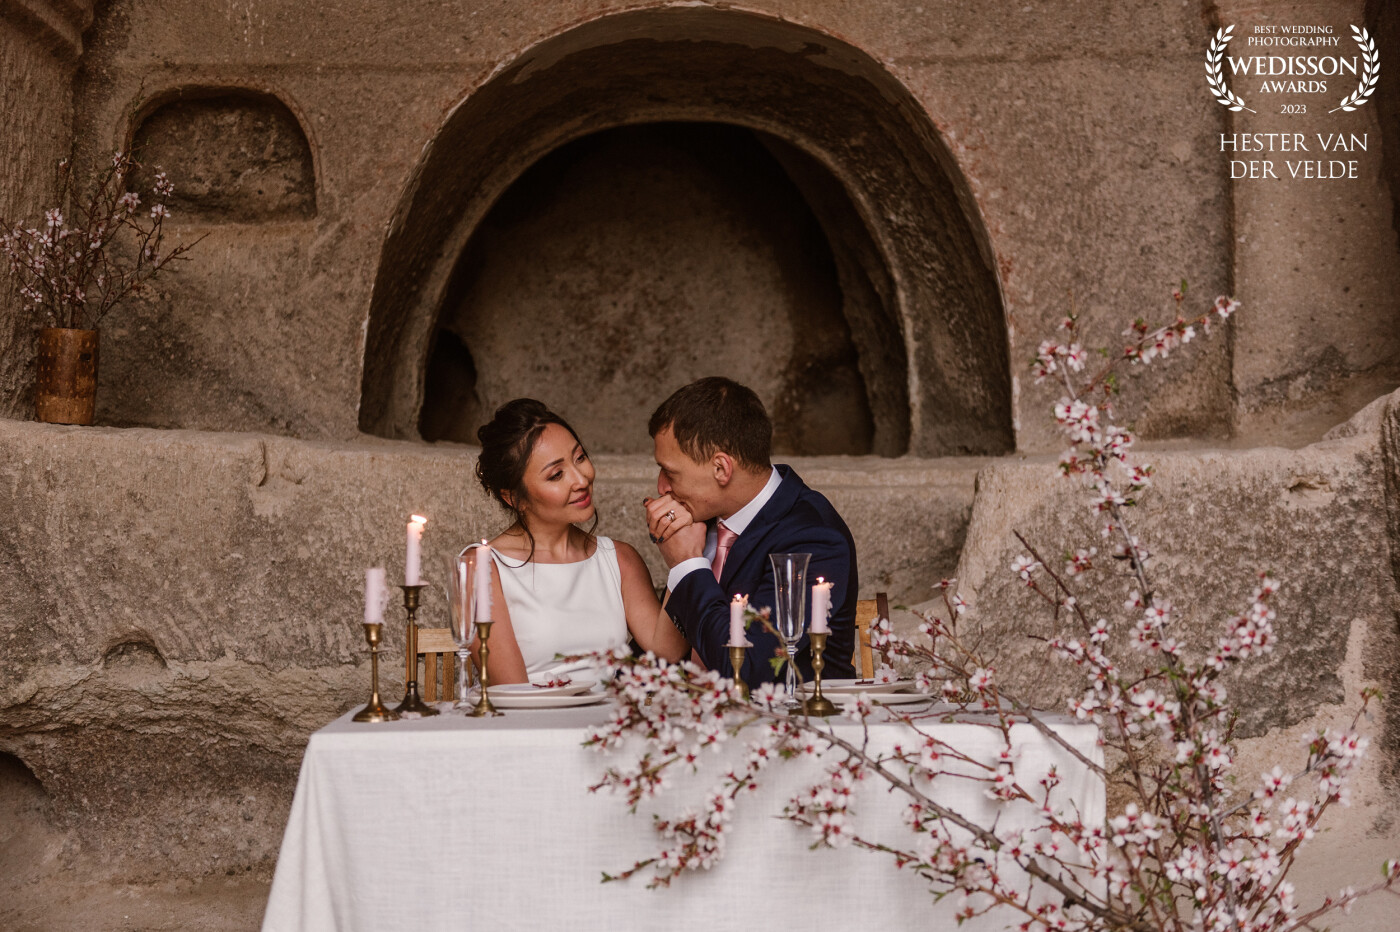 In the caves of Cappadocia, Turkey, we had this beautiful setting. Outside it was snowing (in April!) but inside it was very cosy with all the candles and this beautiful couple.